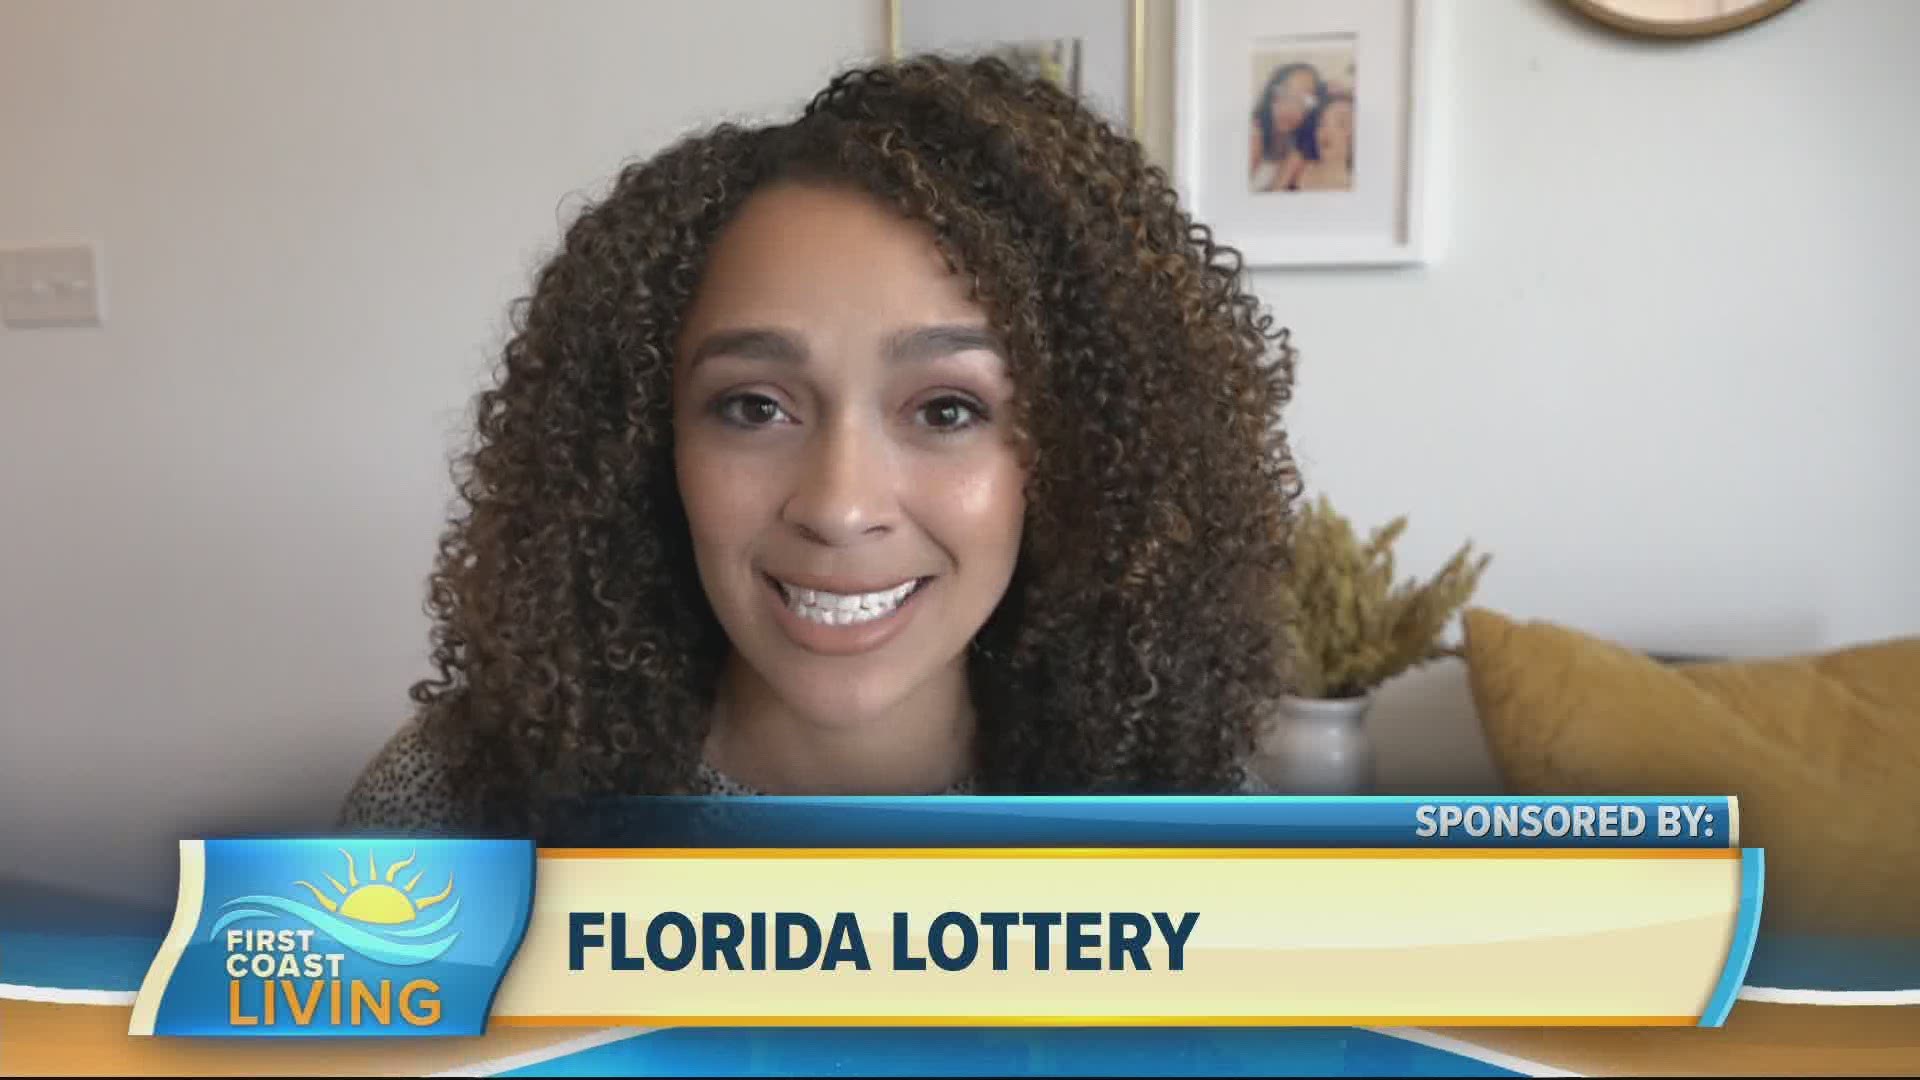 Lottery games are designed to be a fun, low-cost form of entertainment. The Florida Lottery encourages players to know their limits & play responsibly.